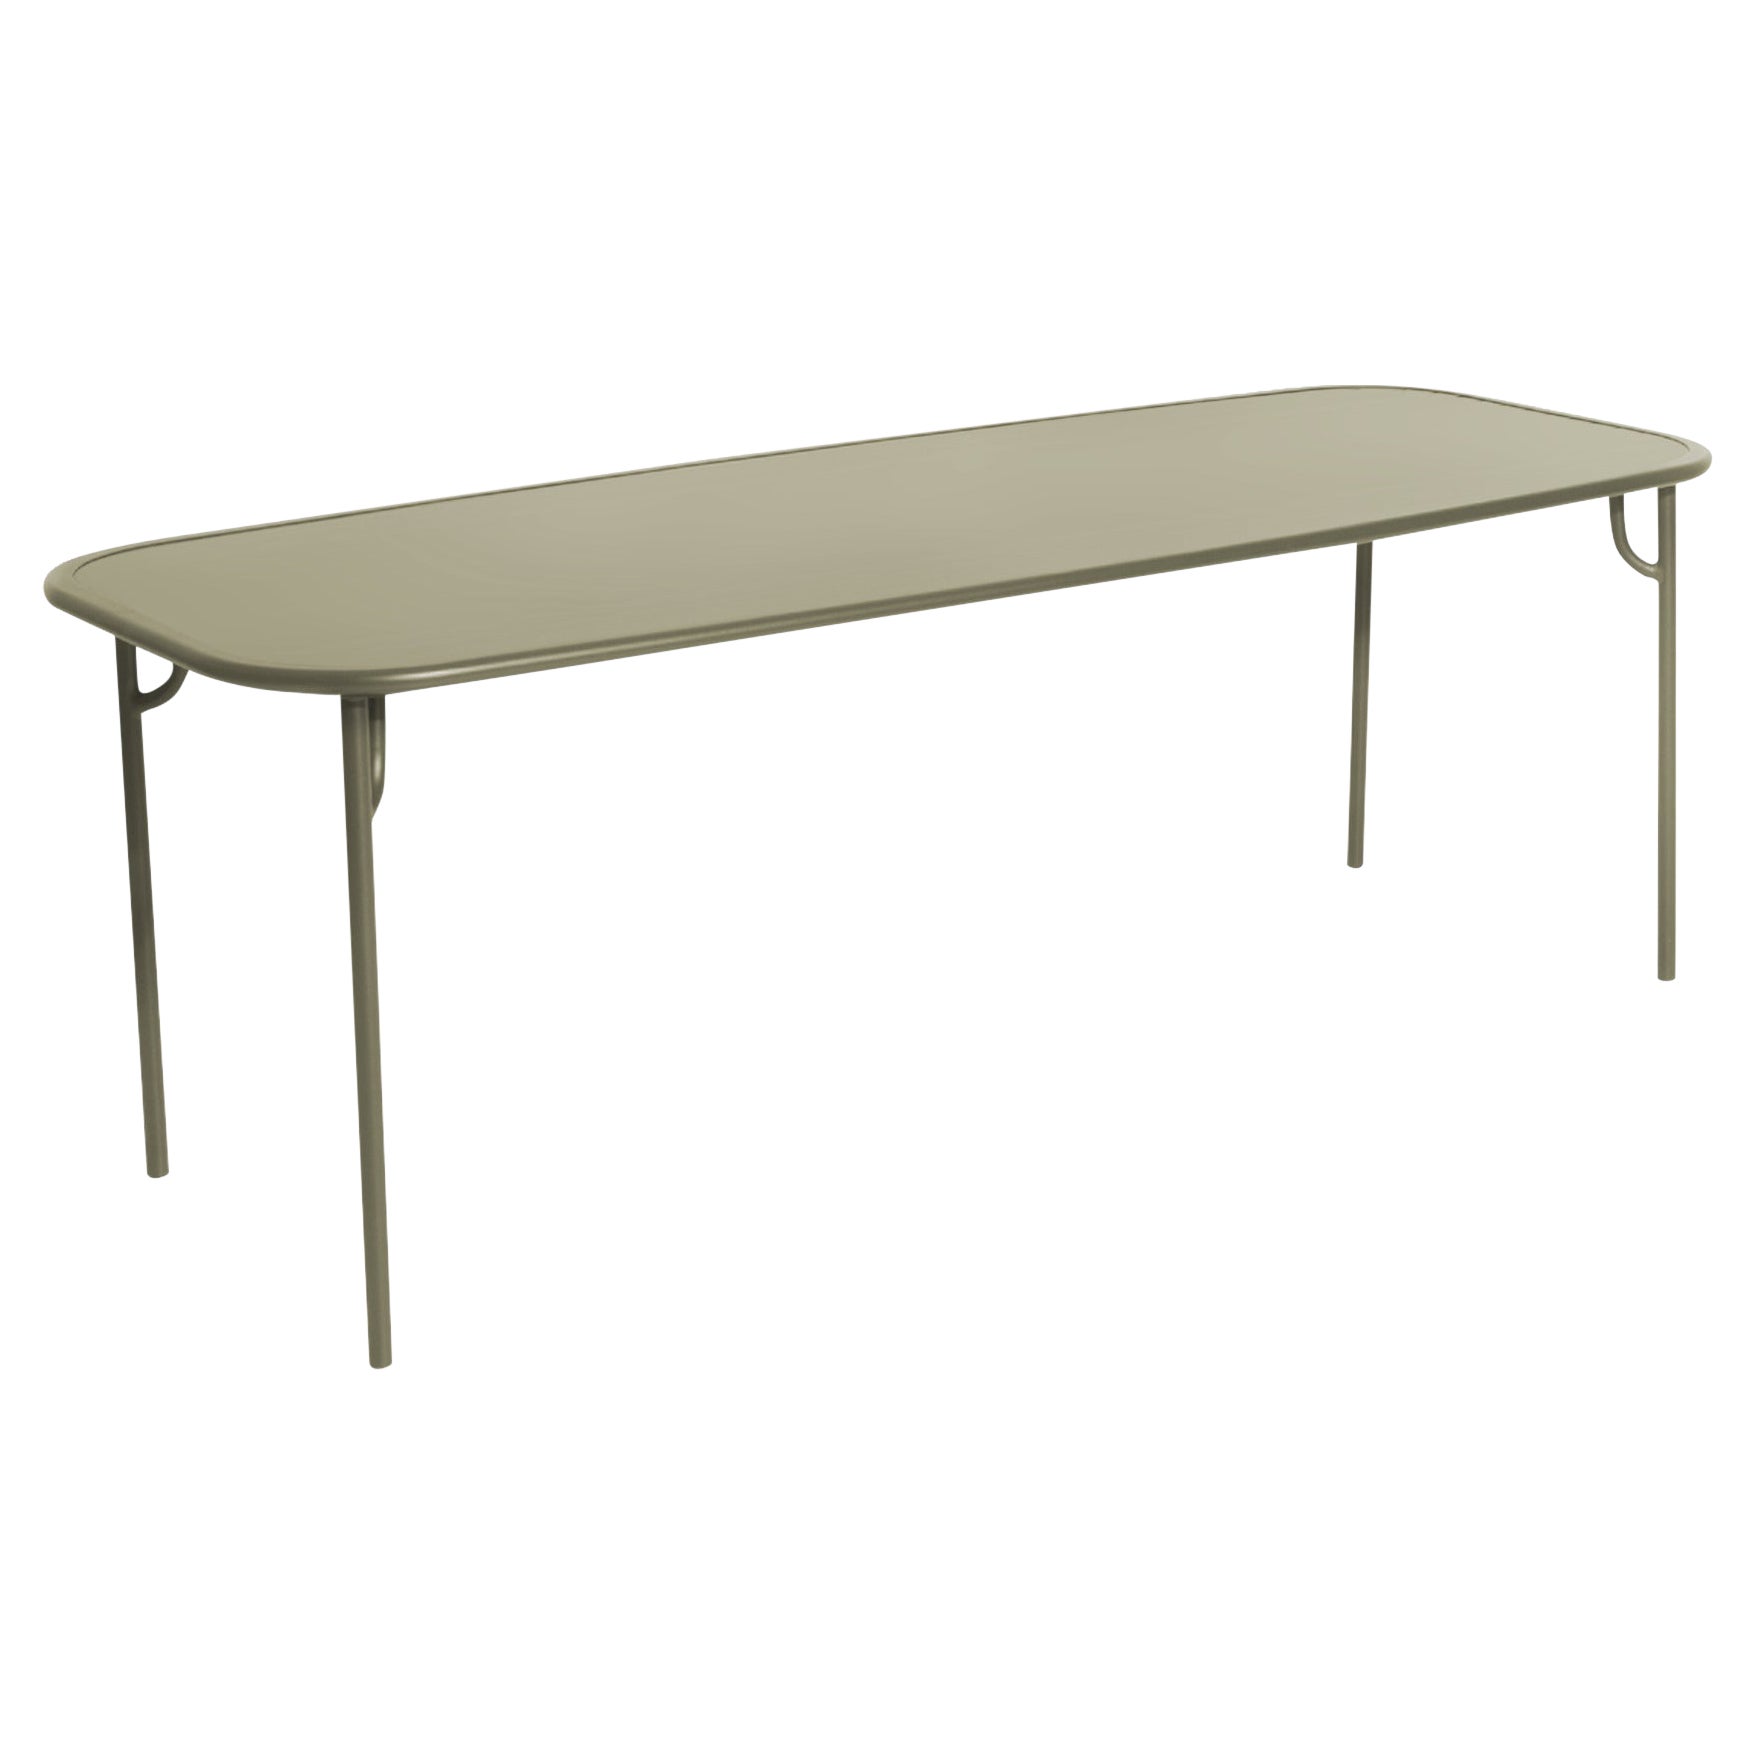 Petite Friture Week-End Large Plain Rectangular Dining Table in Jade Green For Sale